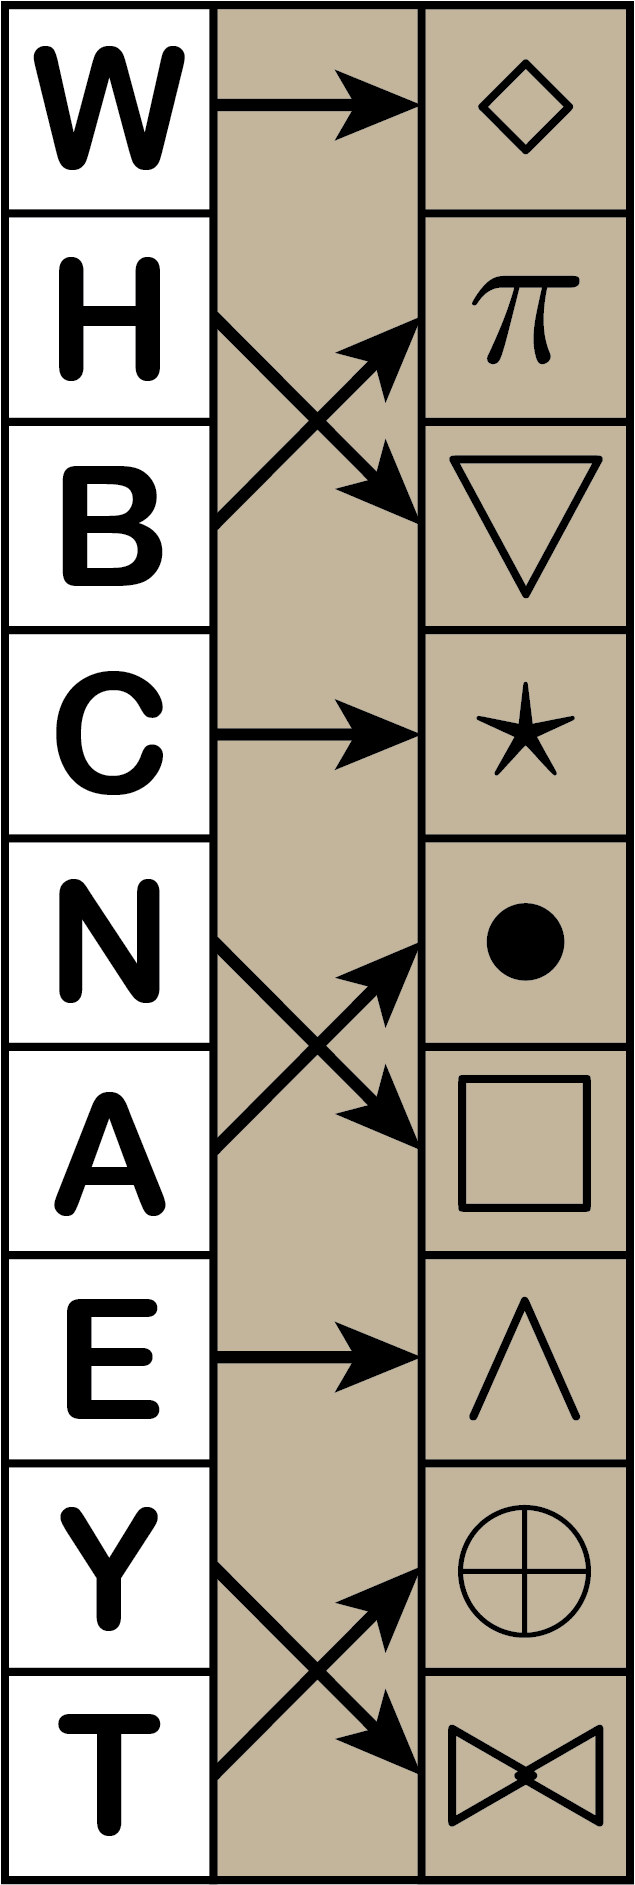 The order of the letters on the left strip is W, H, B, C, N,
    A, E, Y, T.